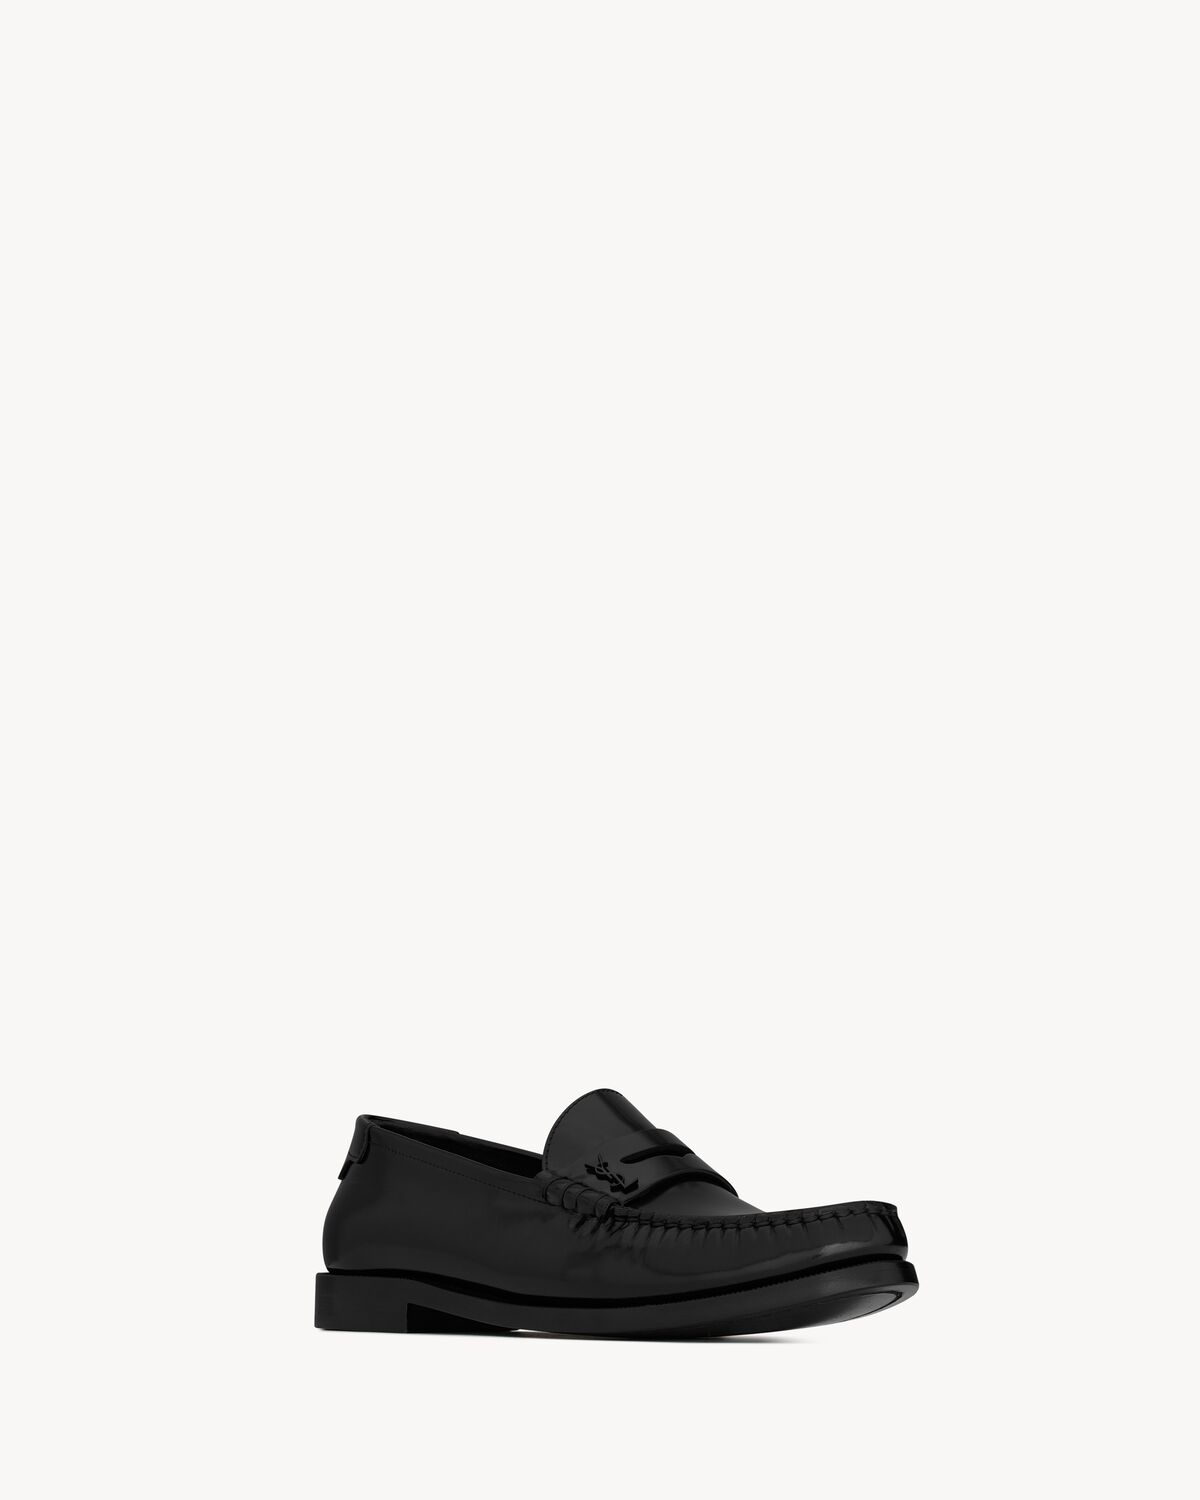 LE LOAFER penny slippers in glazed leather